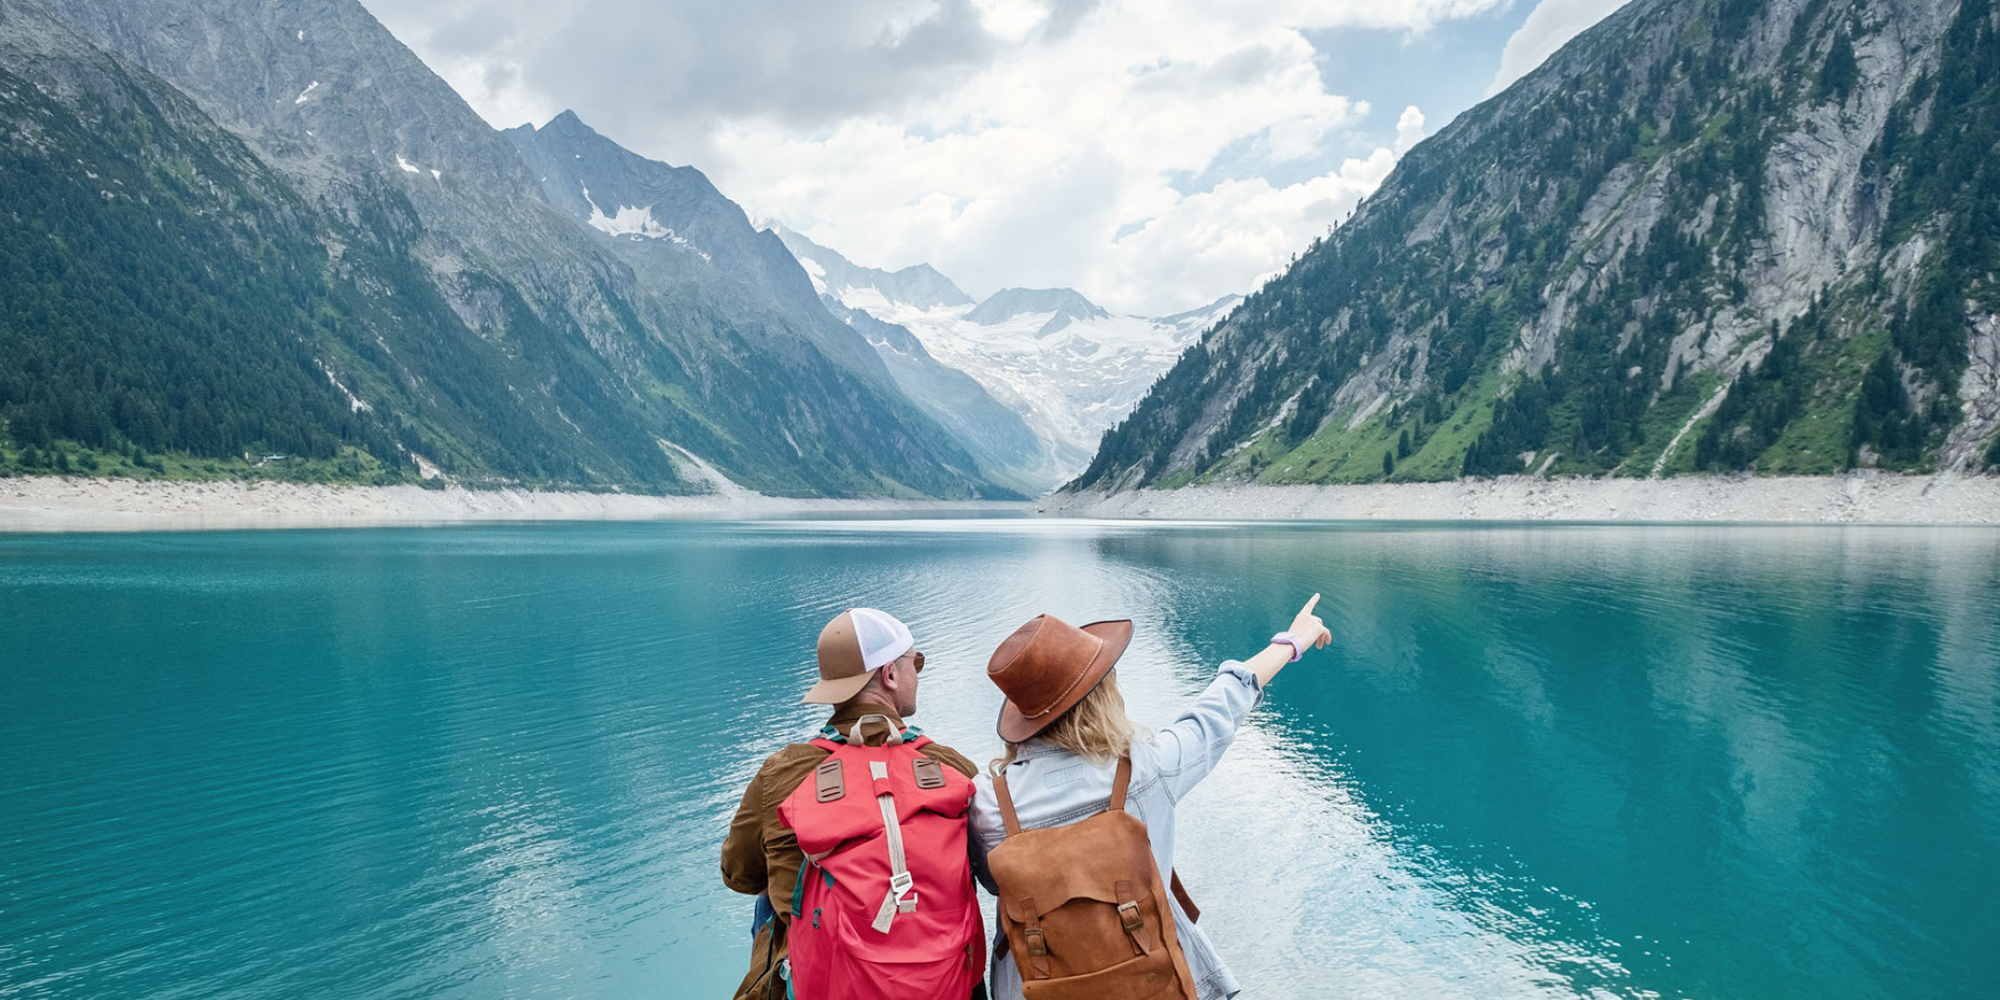 A young couple looking at a beautiful lake surrounded by mountains